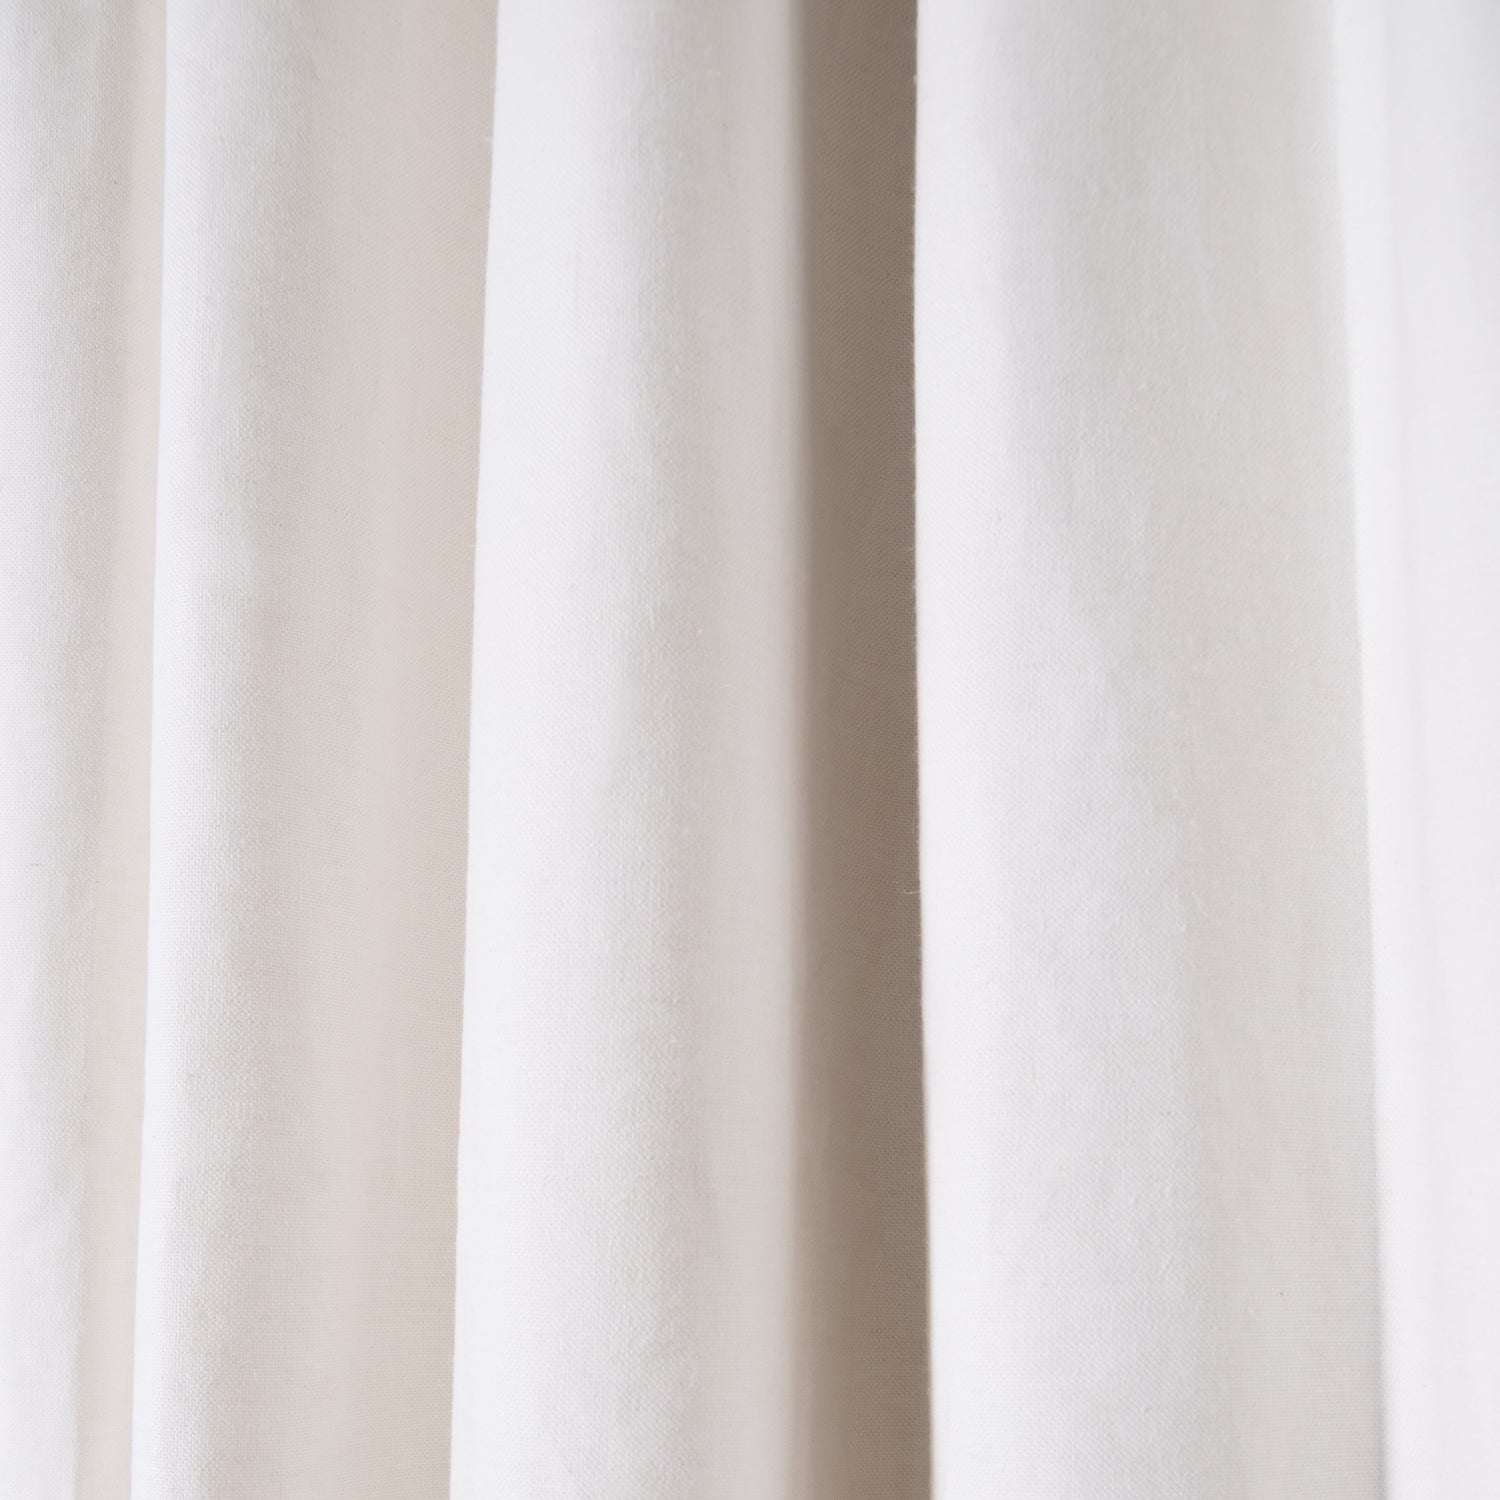 Natural White Linen Curtain Close-Up